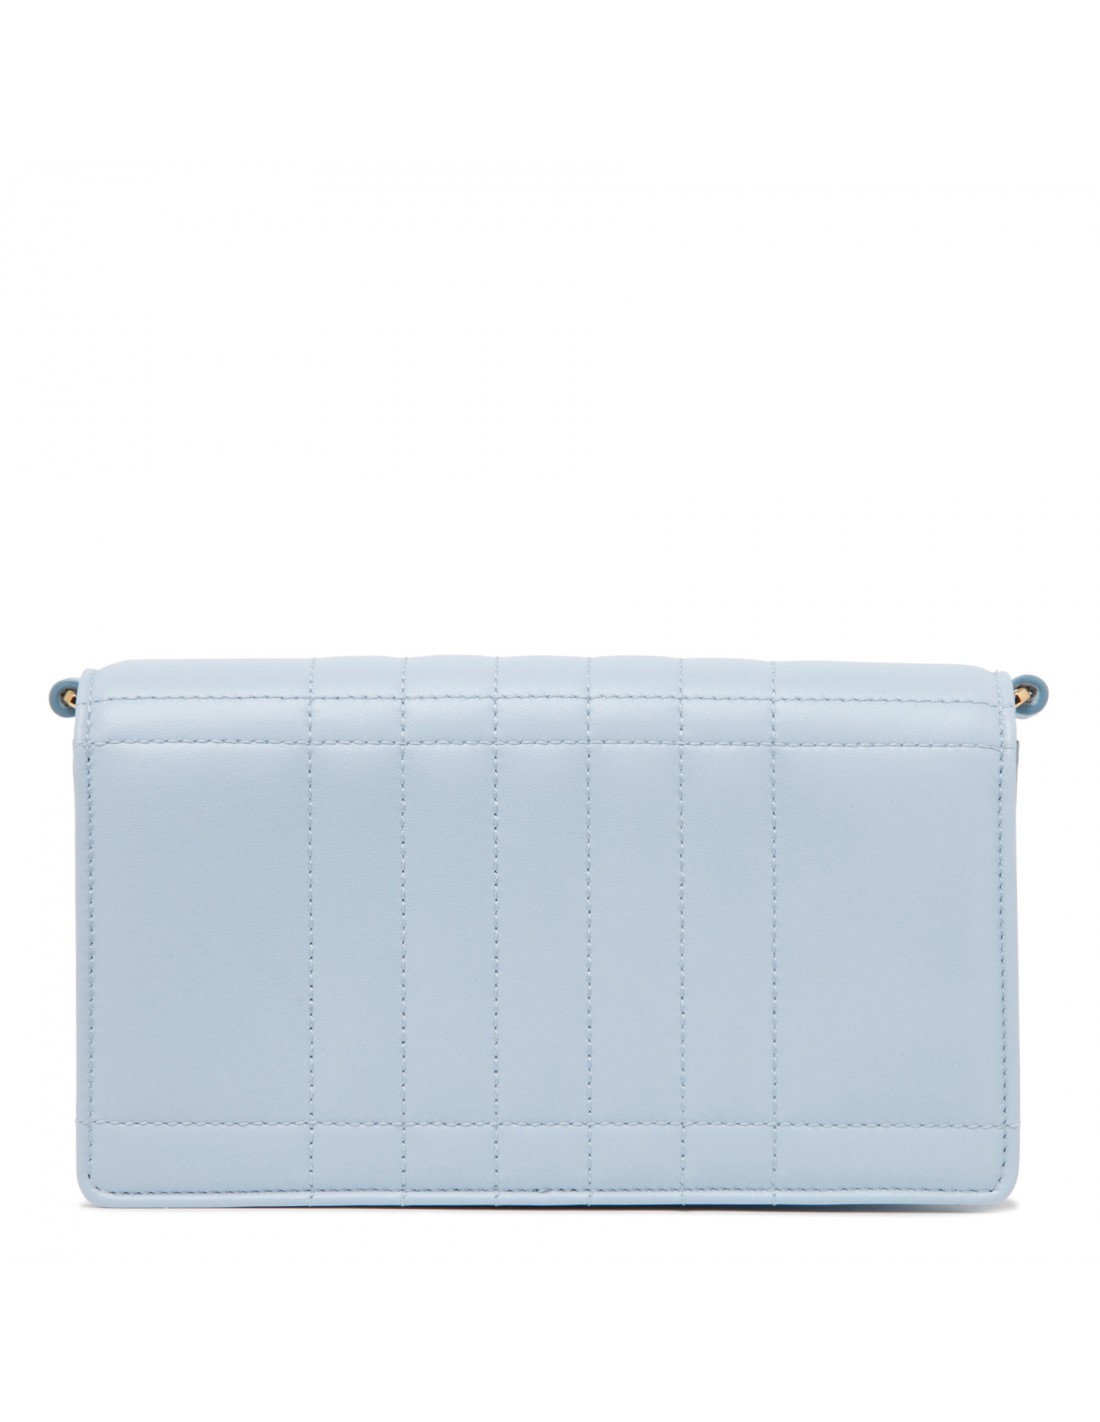 Lola clutch with chain